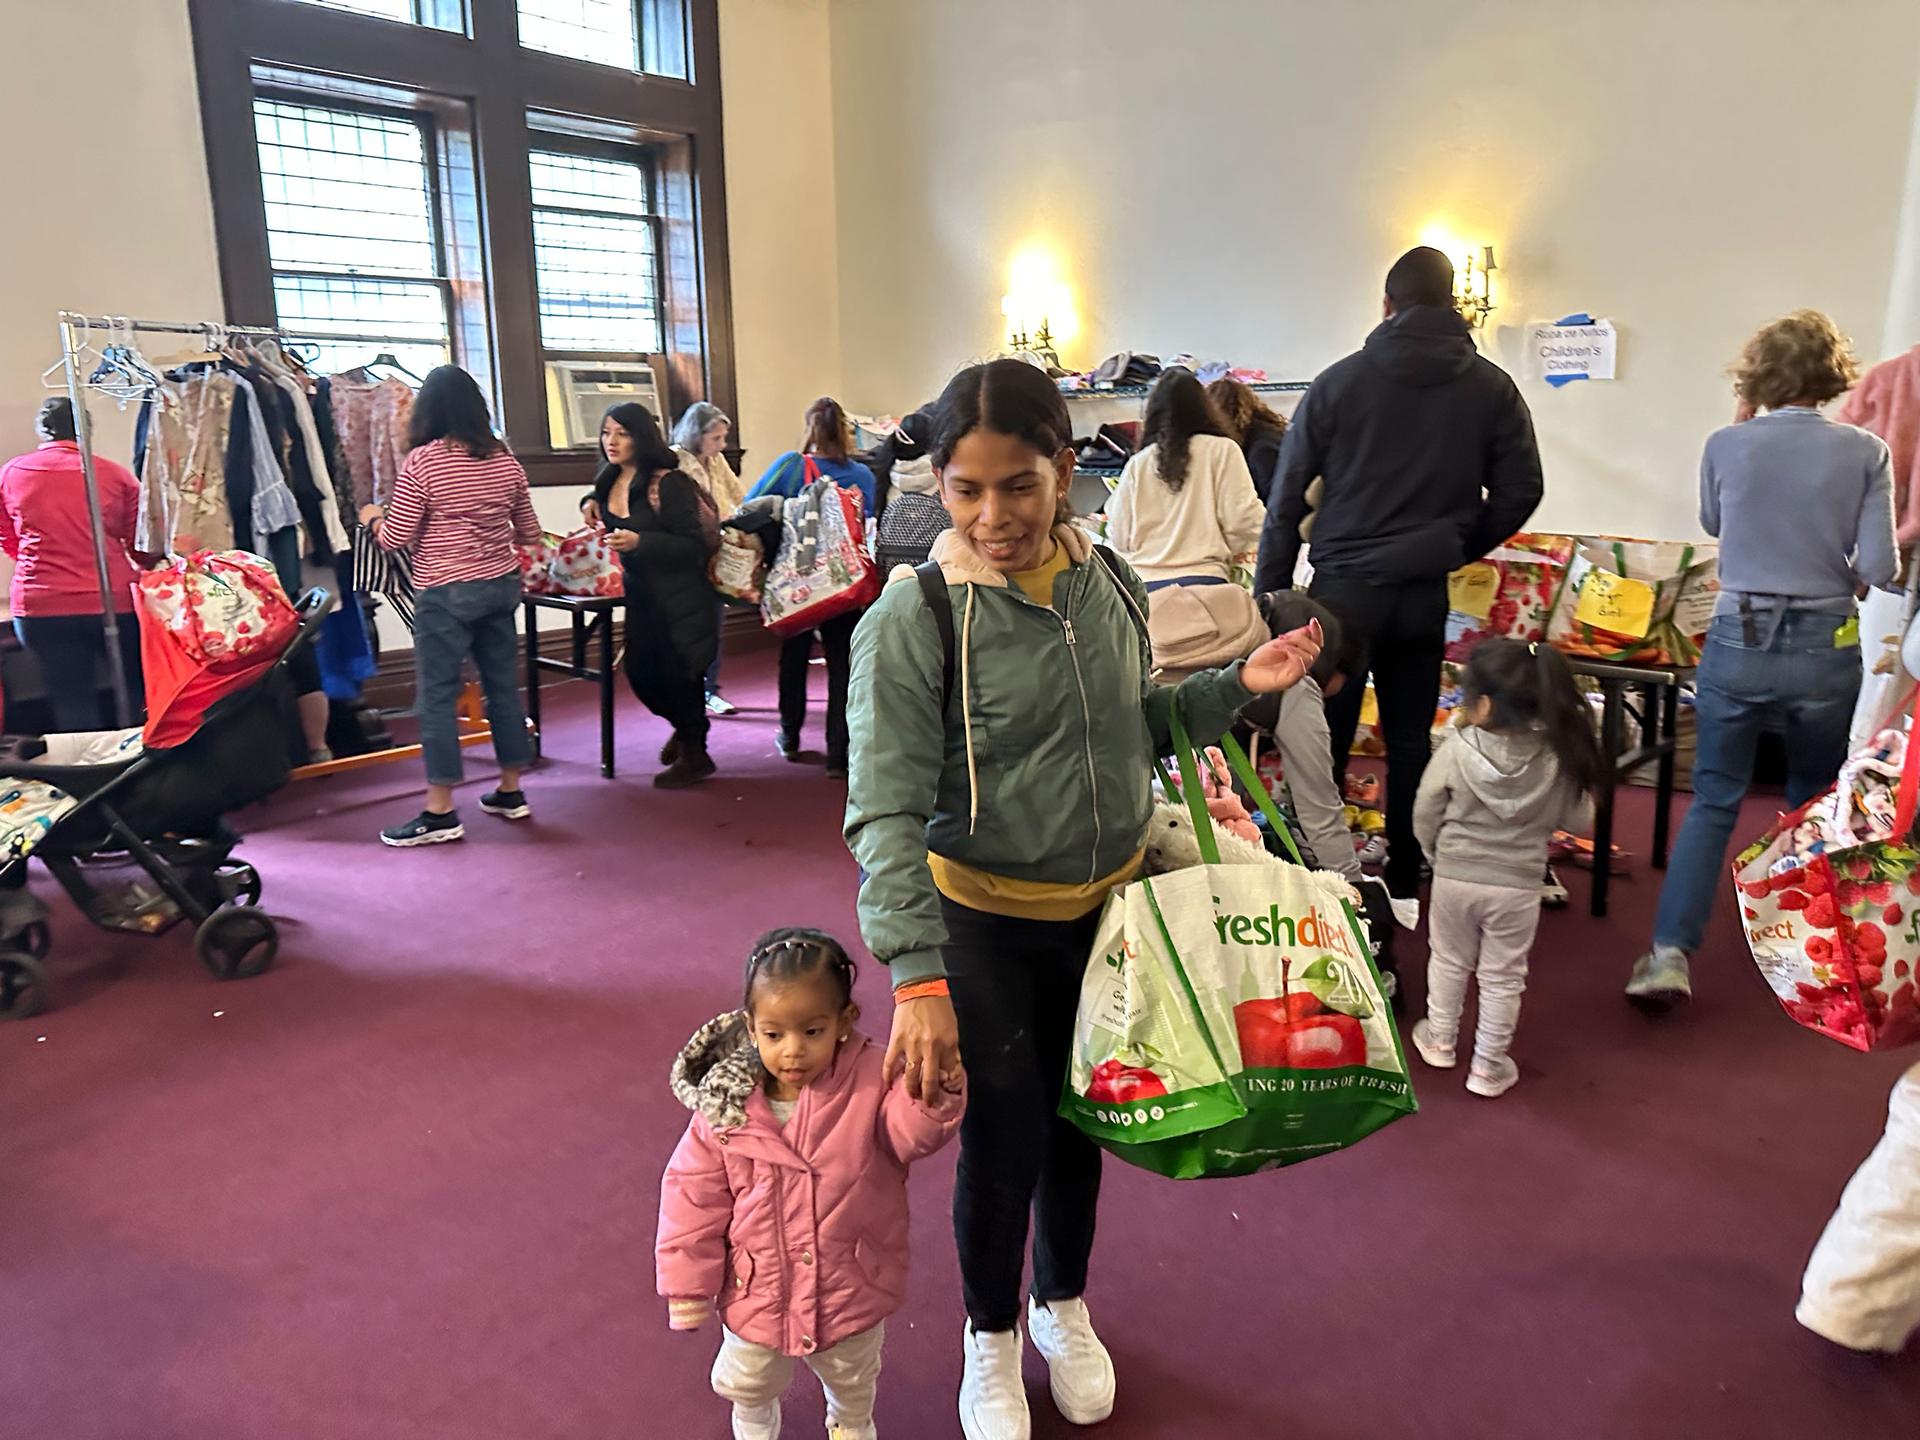 About 200 immigrants come to St. Paul and St. Andrew every week to get clothes, food, toys and diapers.